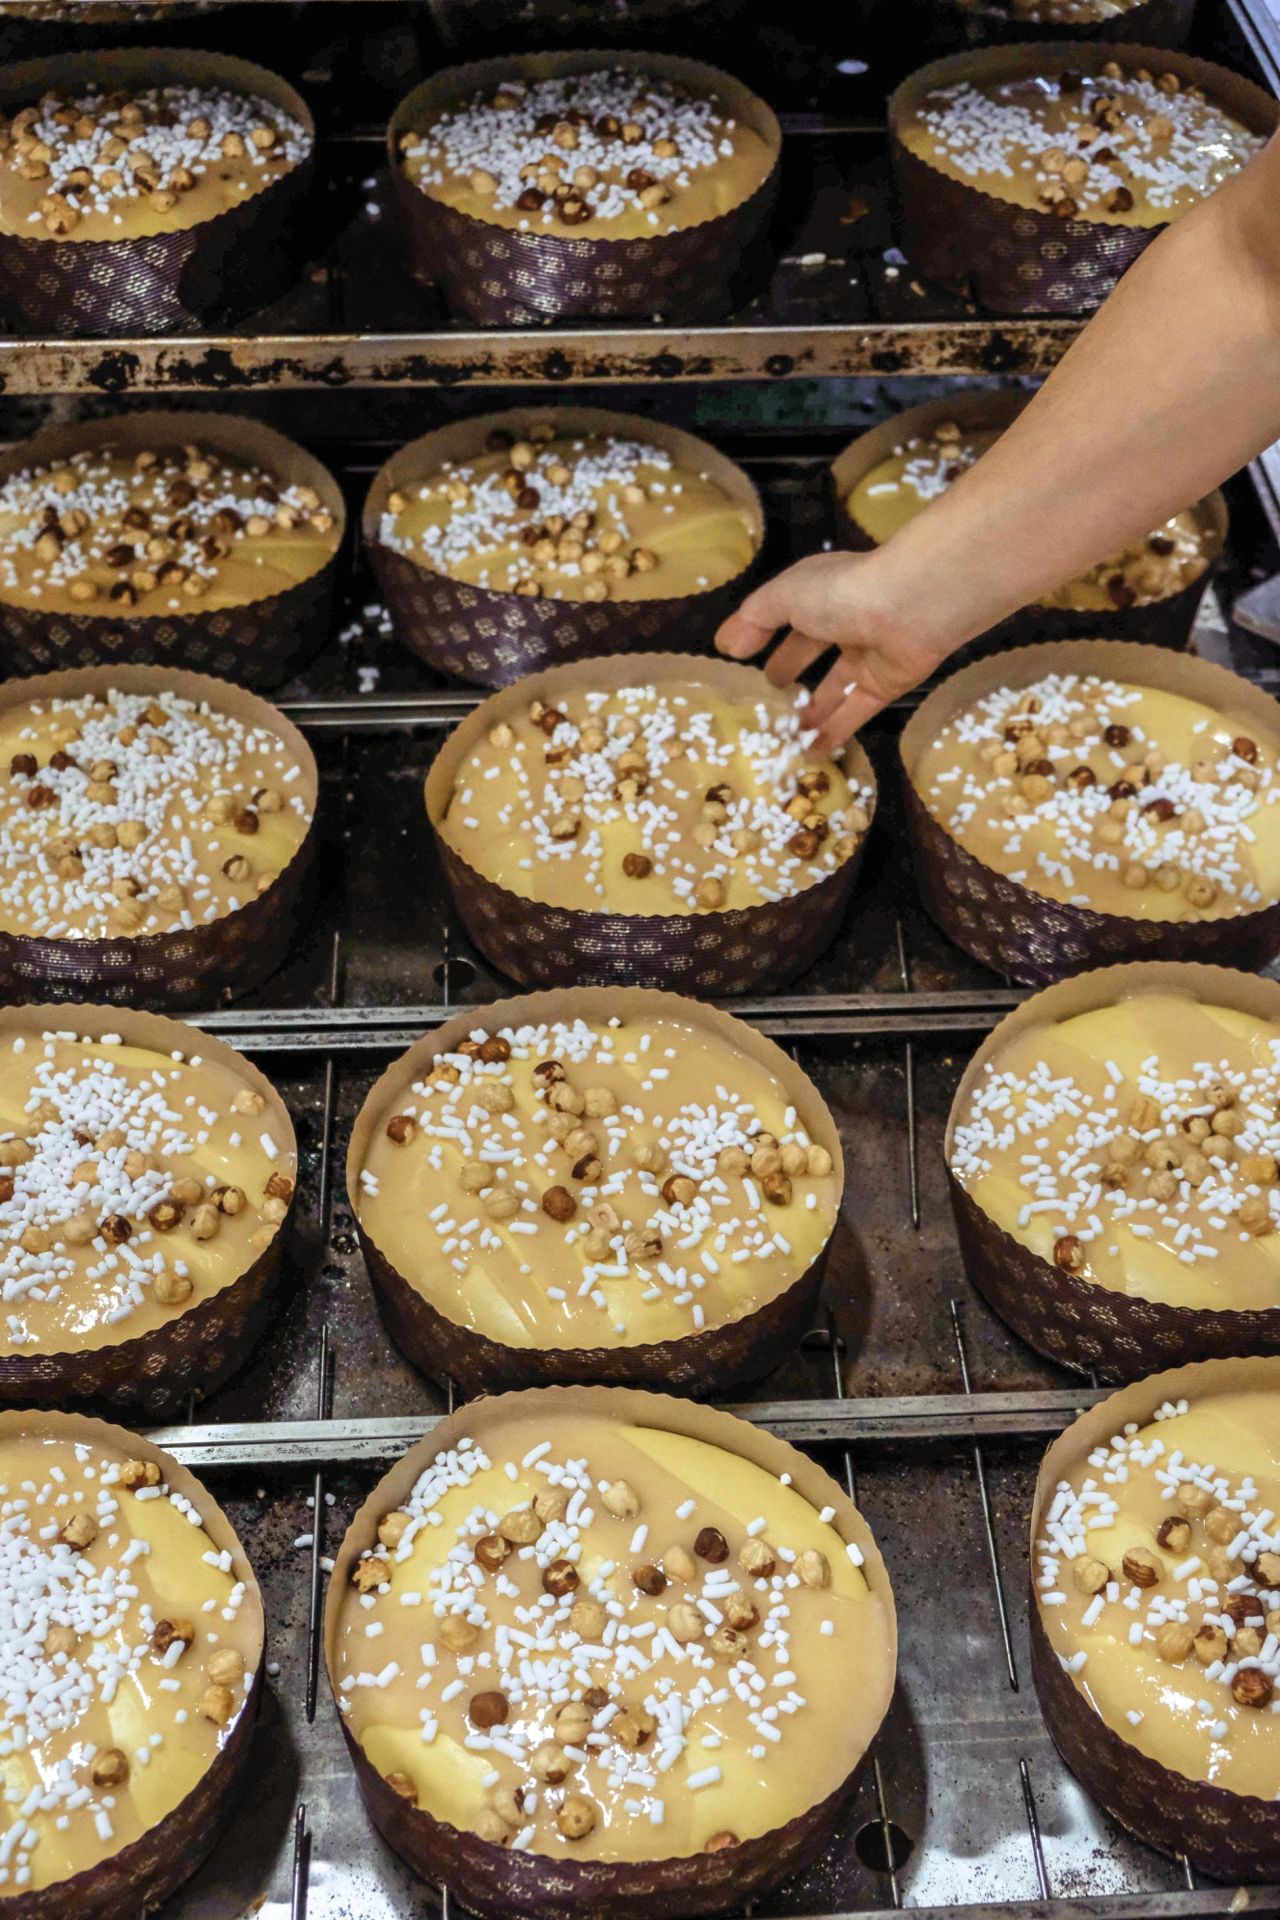 Head pastry chef Nicola Fiasconaro first baked panettone in Sicily in 1988. He used a traditional recipe but added manna — a resin from local trees that acts as a natural sweetener.